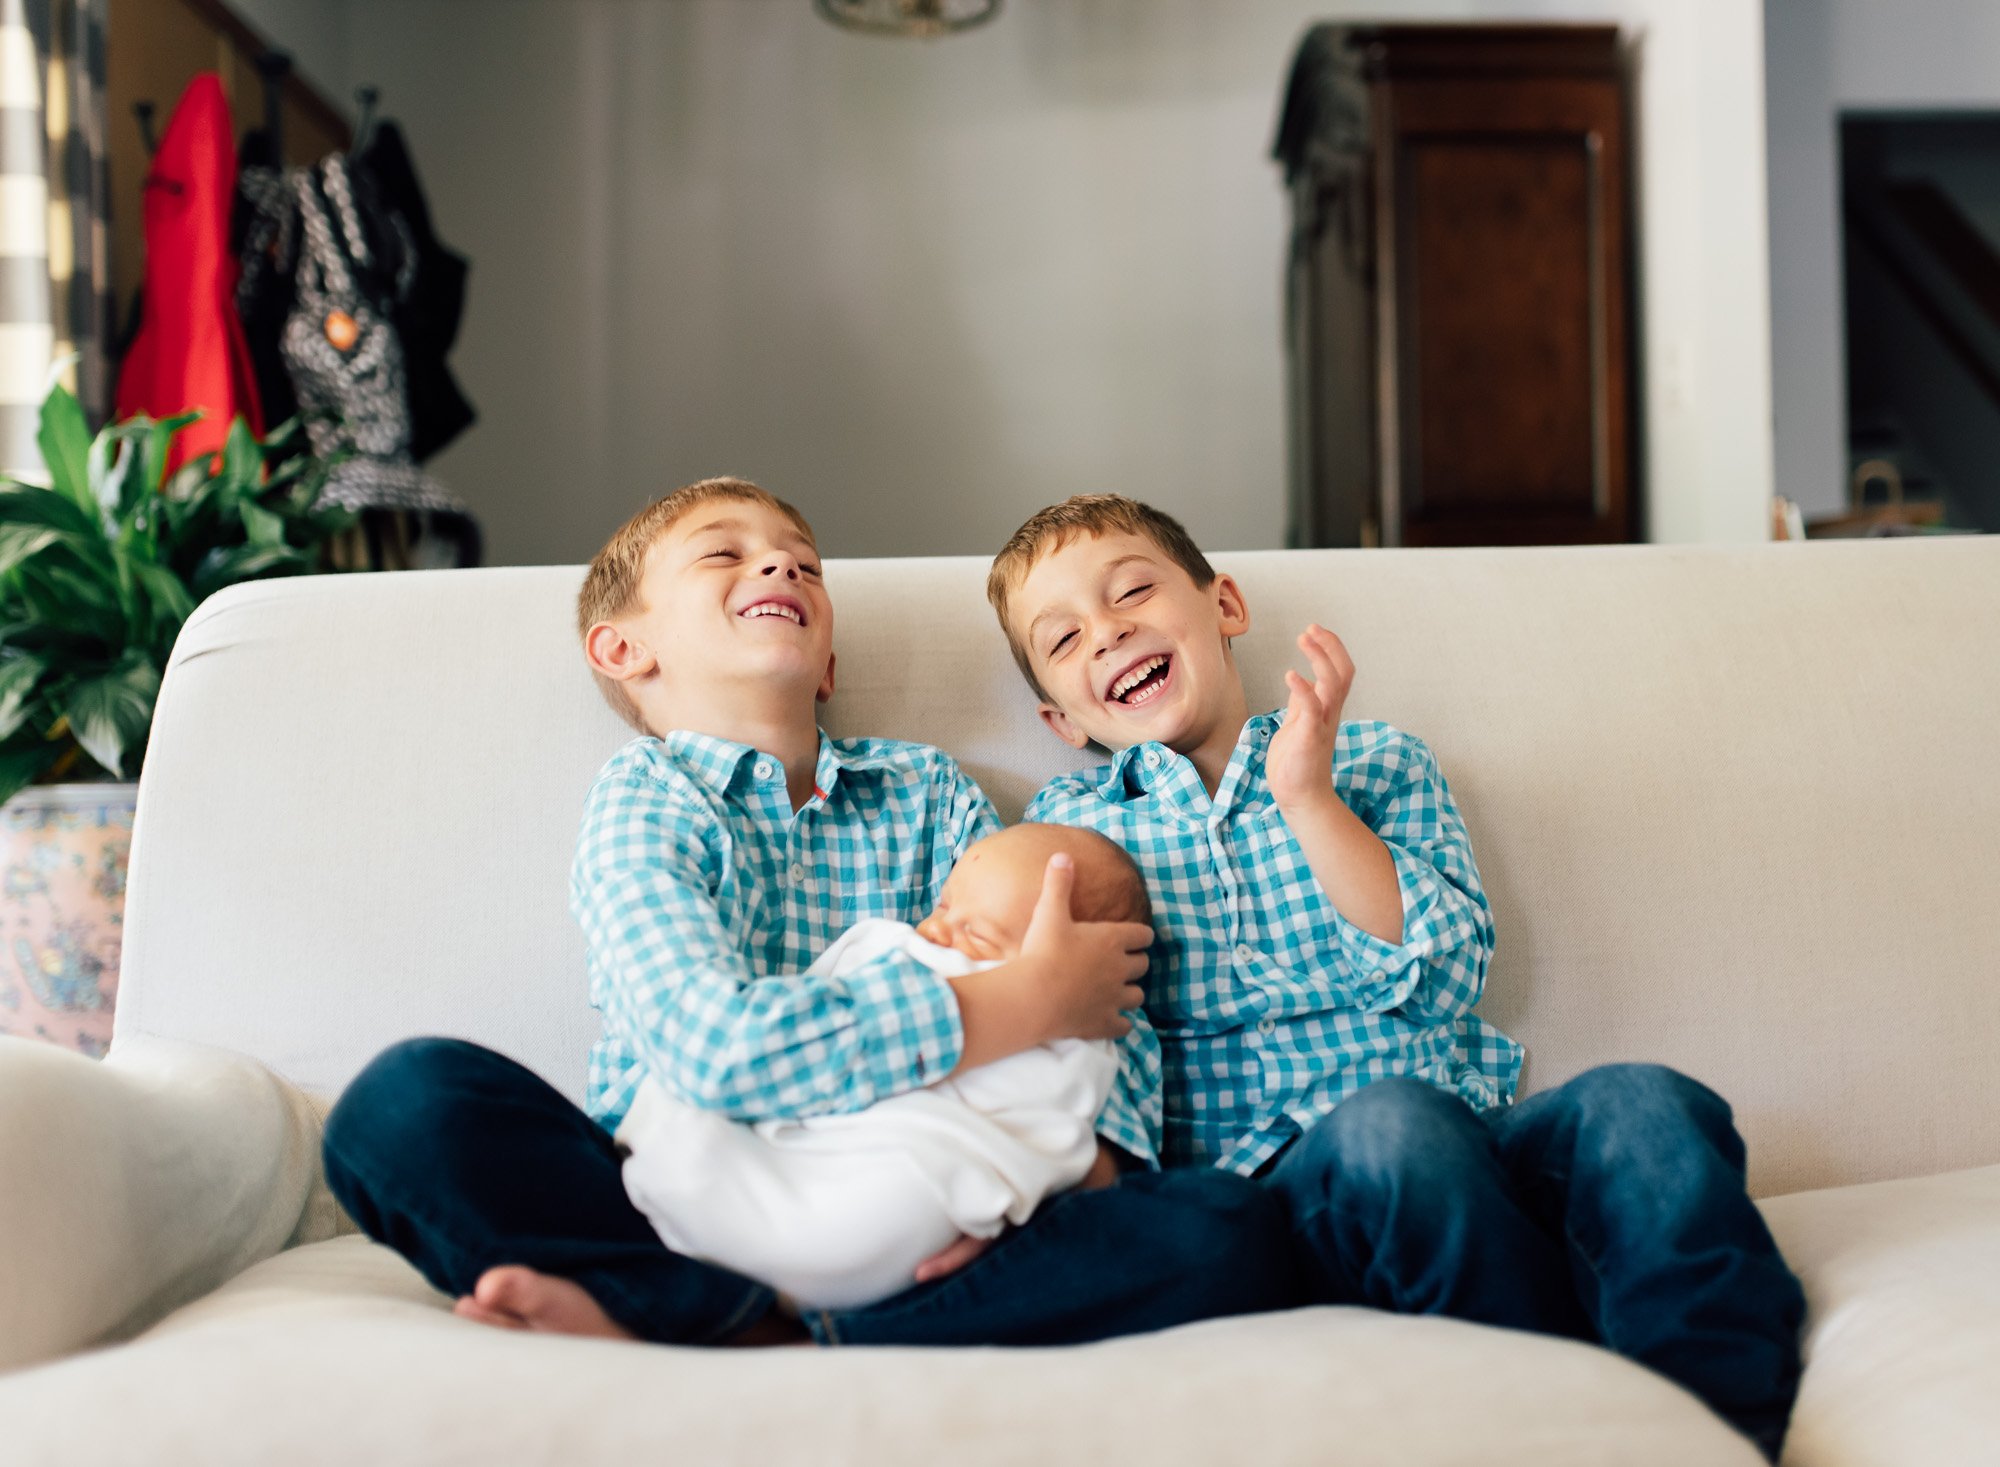 siblings laughing and holding newborn baby  St. Louis Newborn Photography sarahrowlandphotography.com